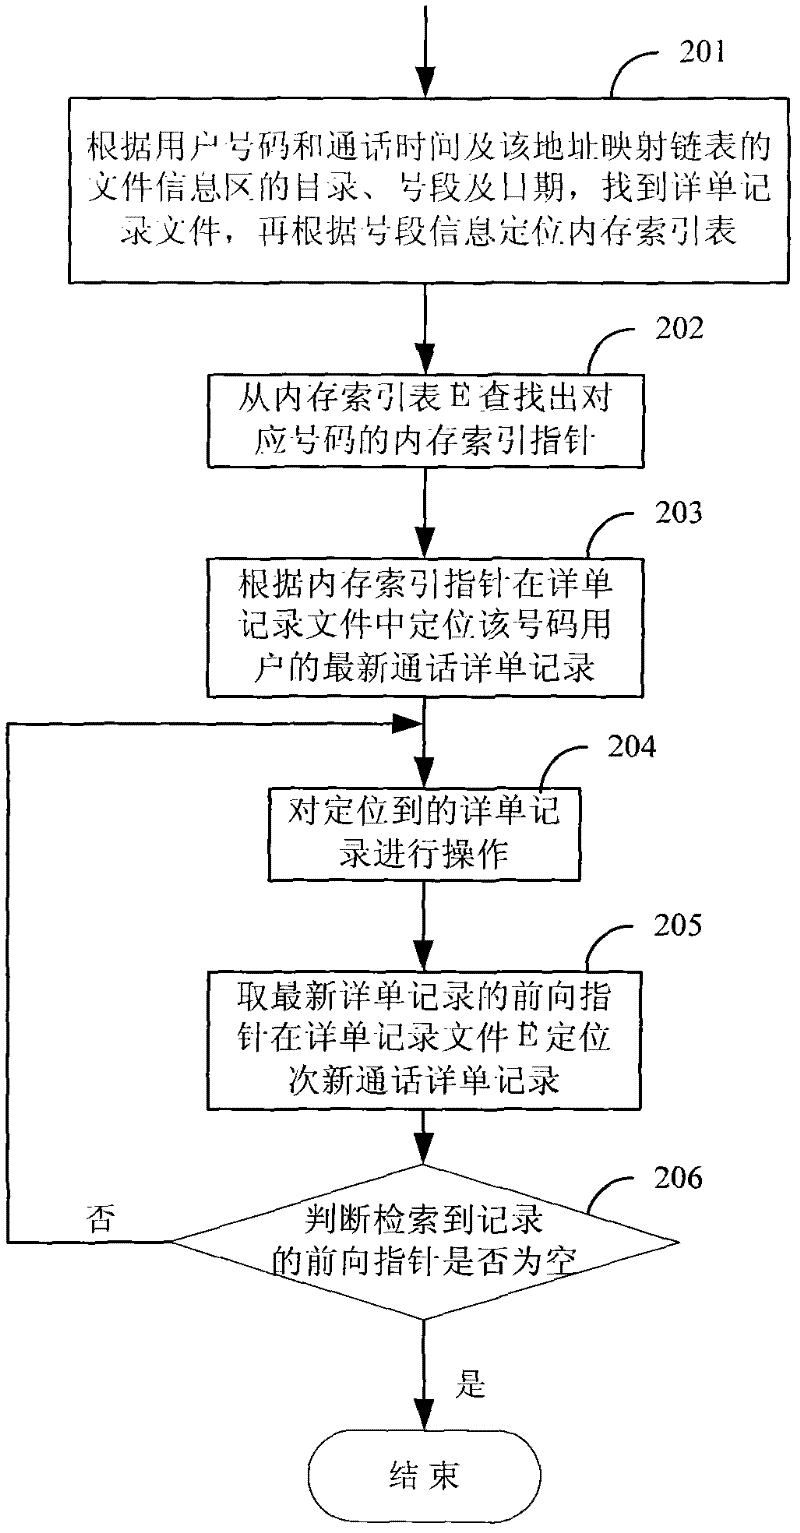 Method and device for rapidly storing and retrieving detailed tickets